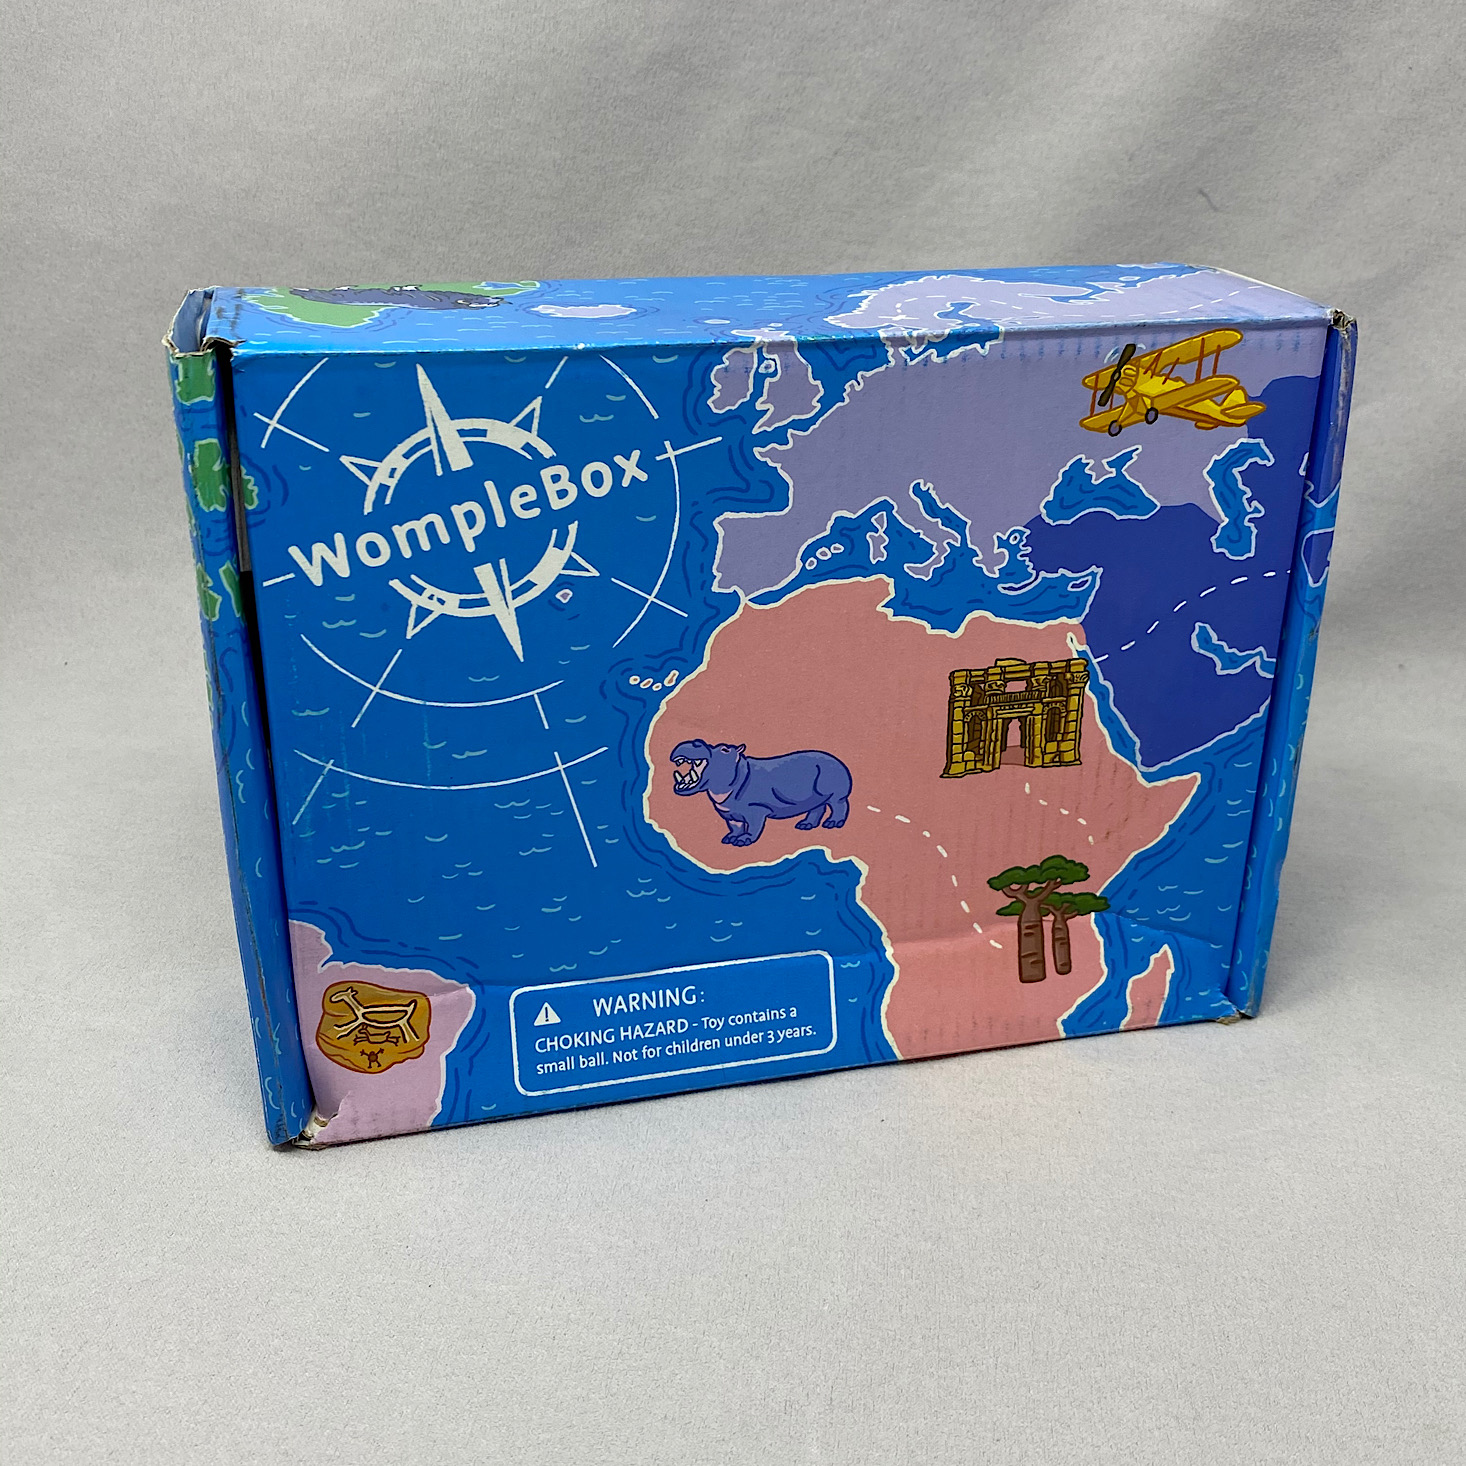 WompleBox “Brazil” Box Review + Coupon – January 2021